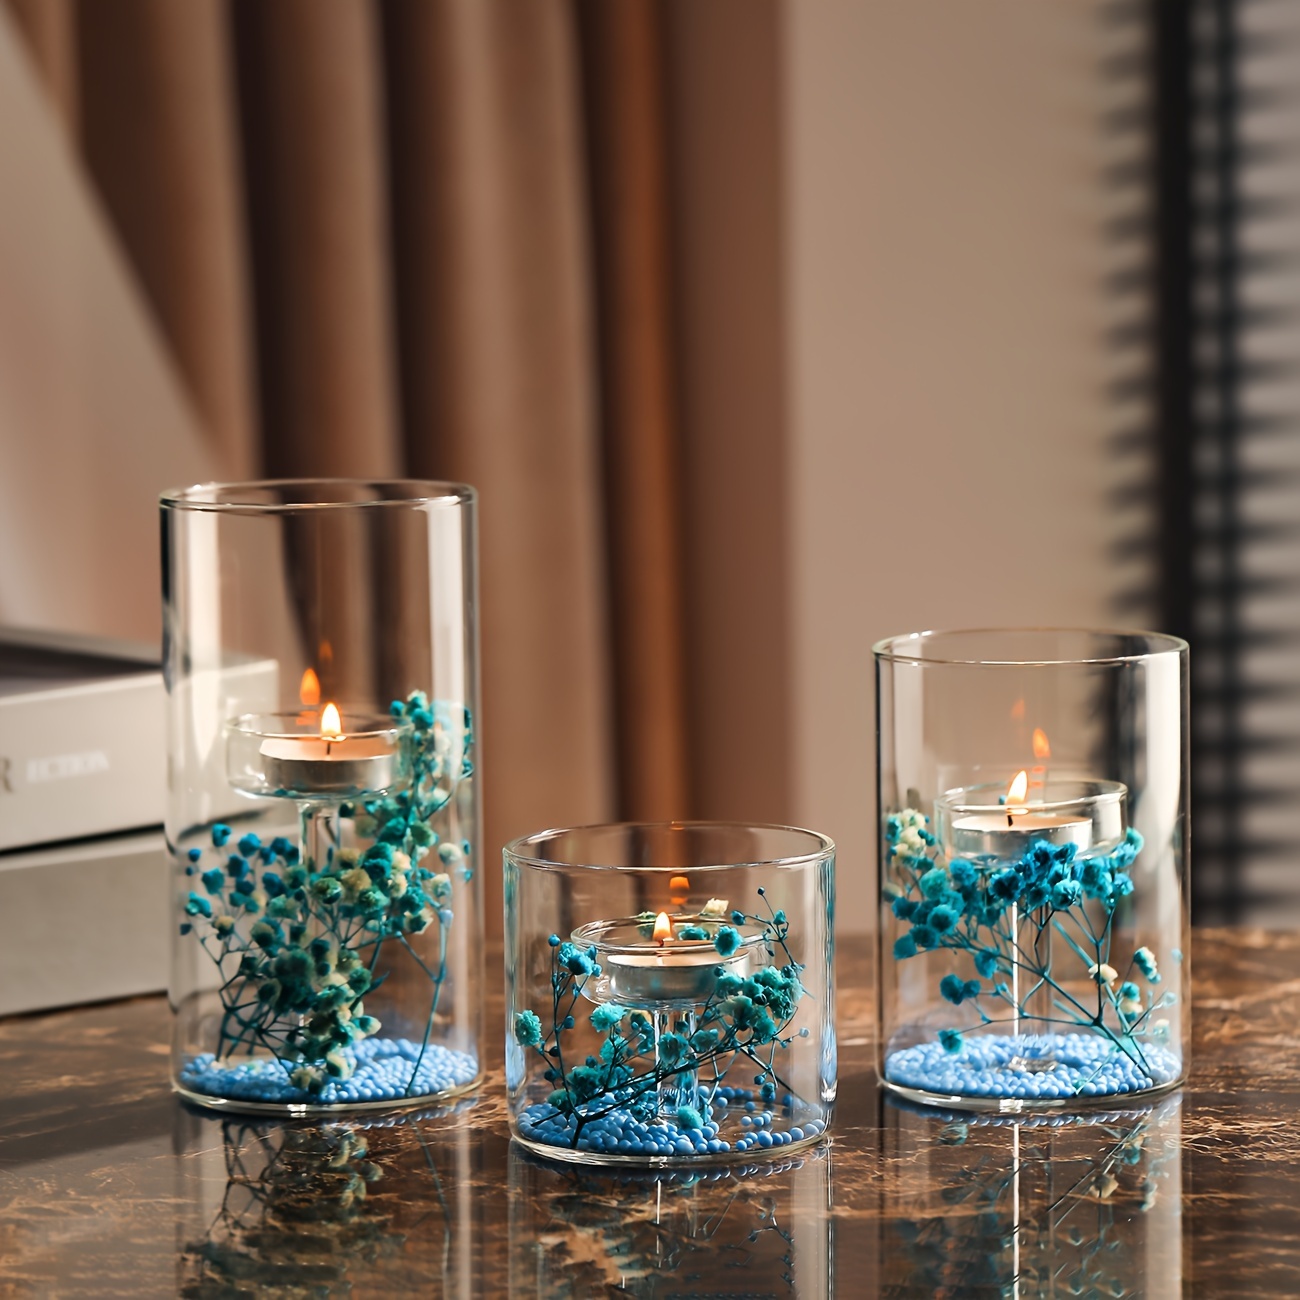 

1pc Windproof Candle Holder, Blue Vase Candle Holder, Candlelight Dinner Gift Romantic Home Ornament, Birthday Party Atmosphere Candle Holder (including Blue Flowers & Small Ball Accessories)